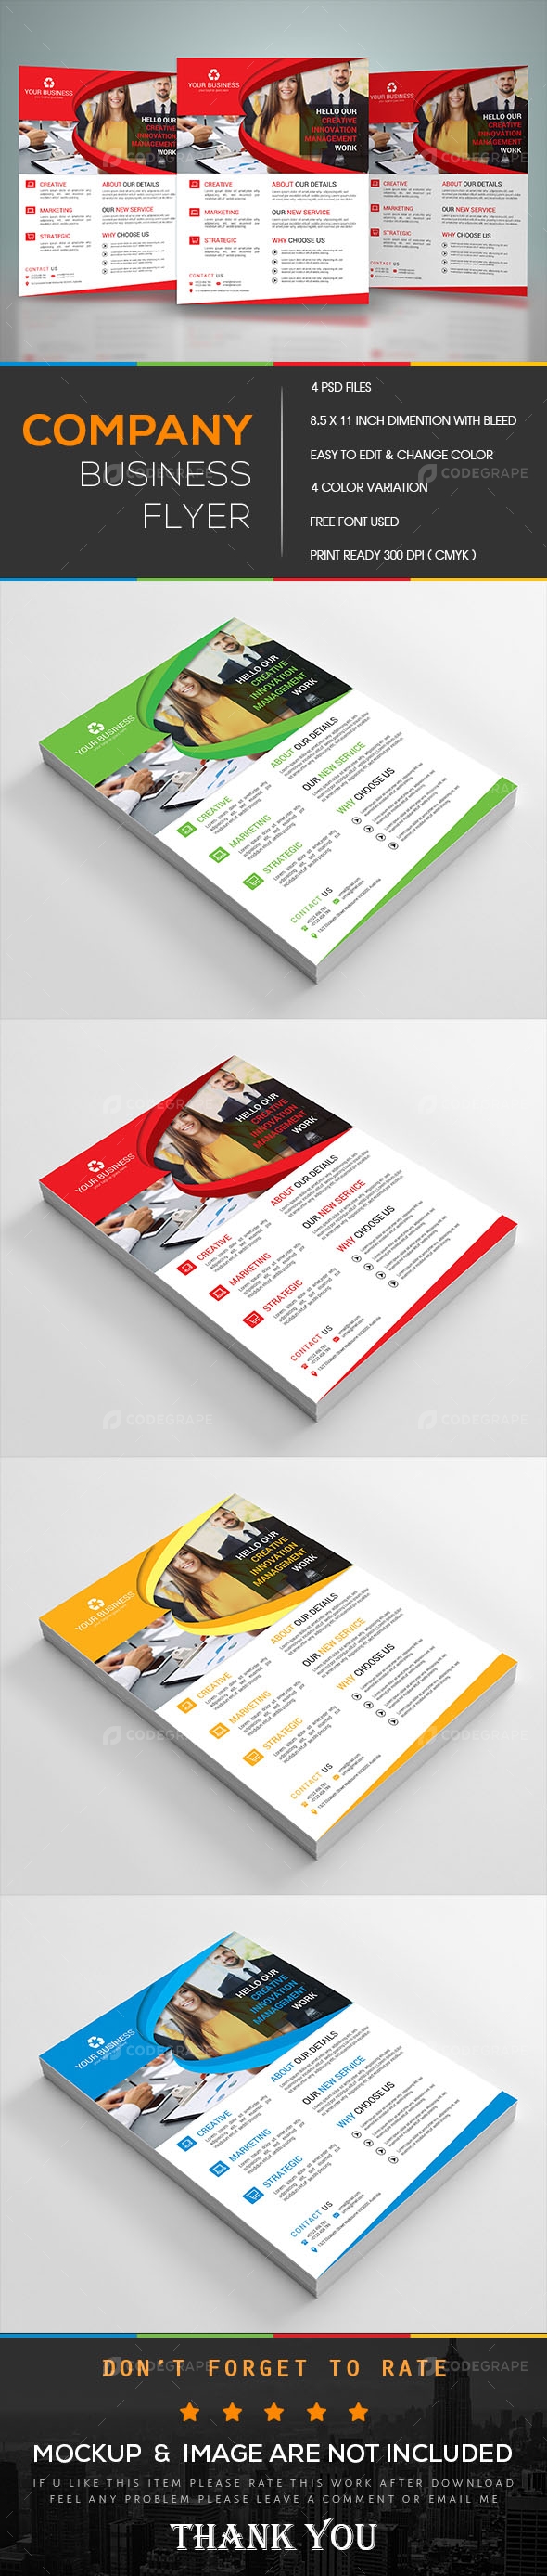 Company Business Flyer